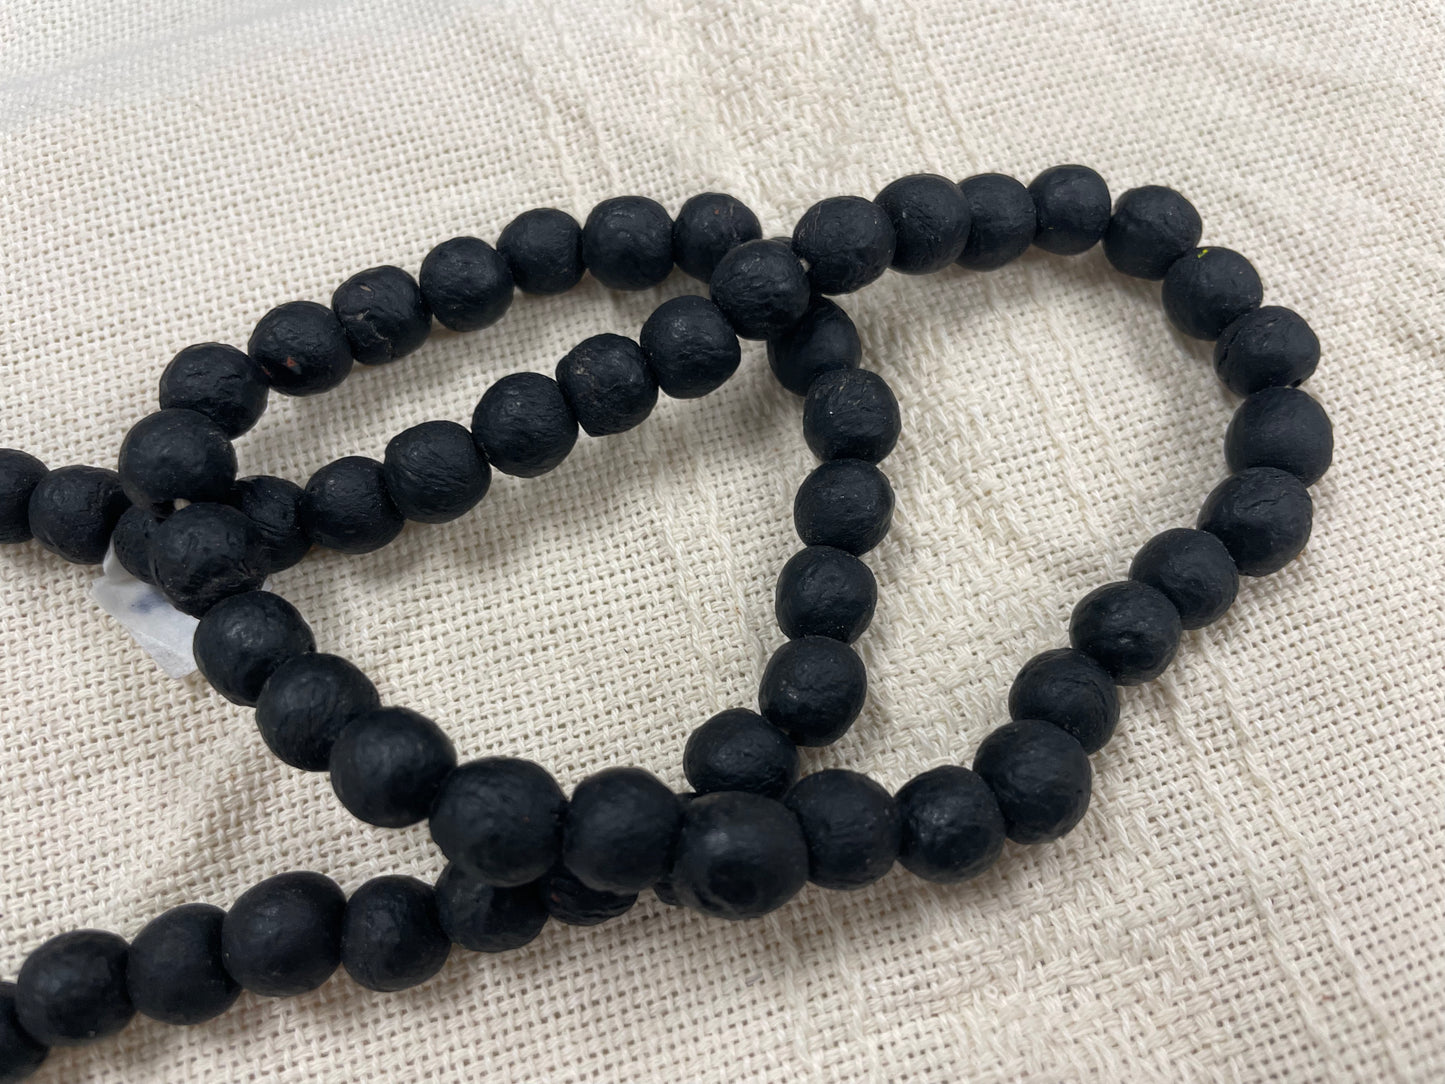 Small Glass Beads from Ghana in Black